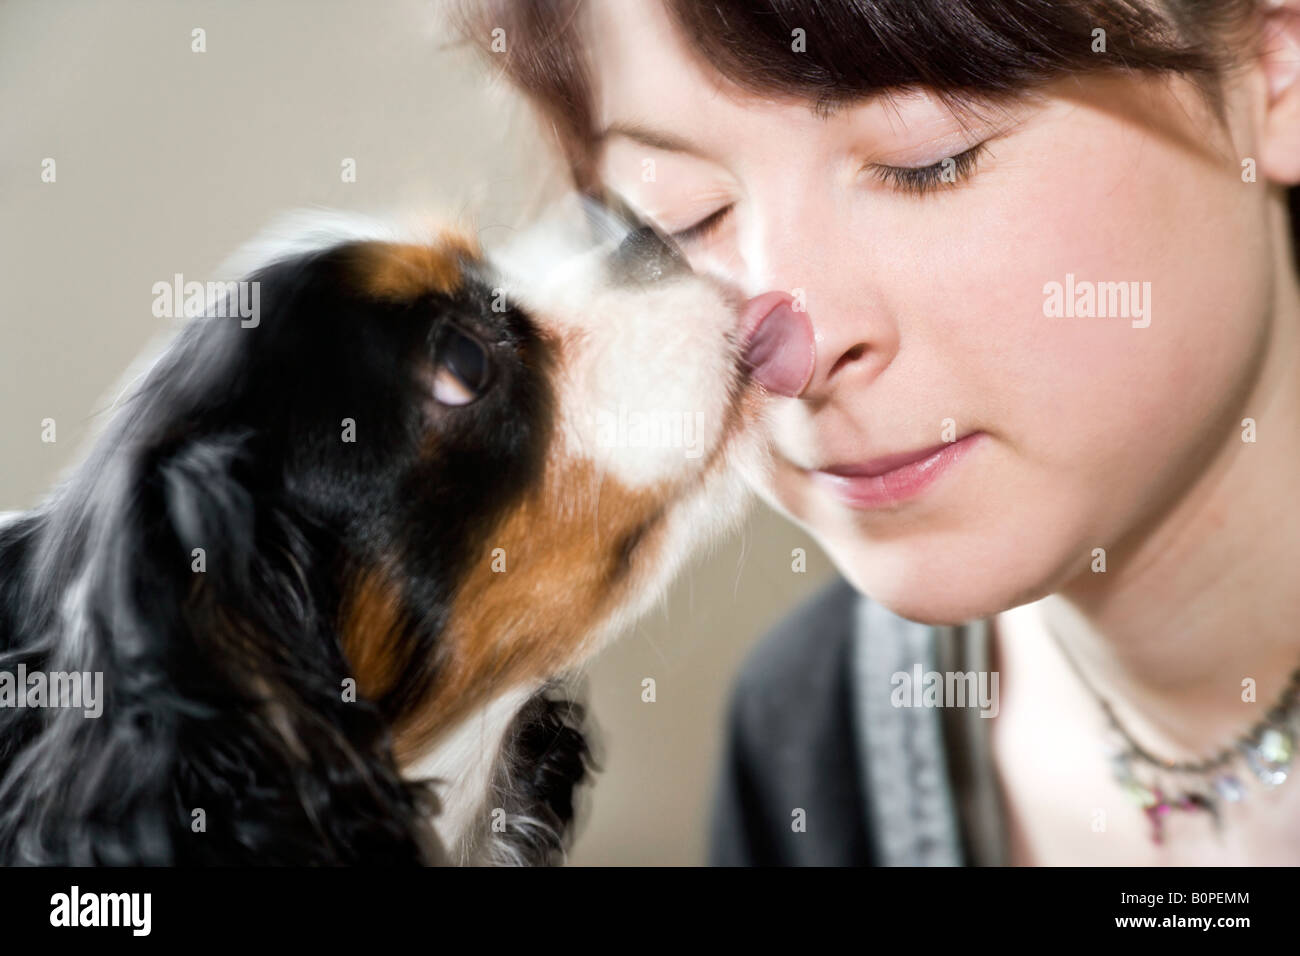 A male ^dog of the Cavalier King Charles Spaniel breed rapidly licking the nose of a girl. Stock Photo